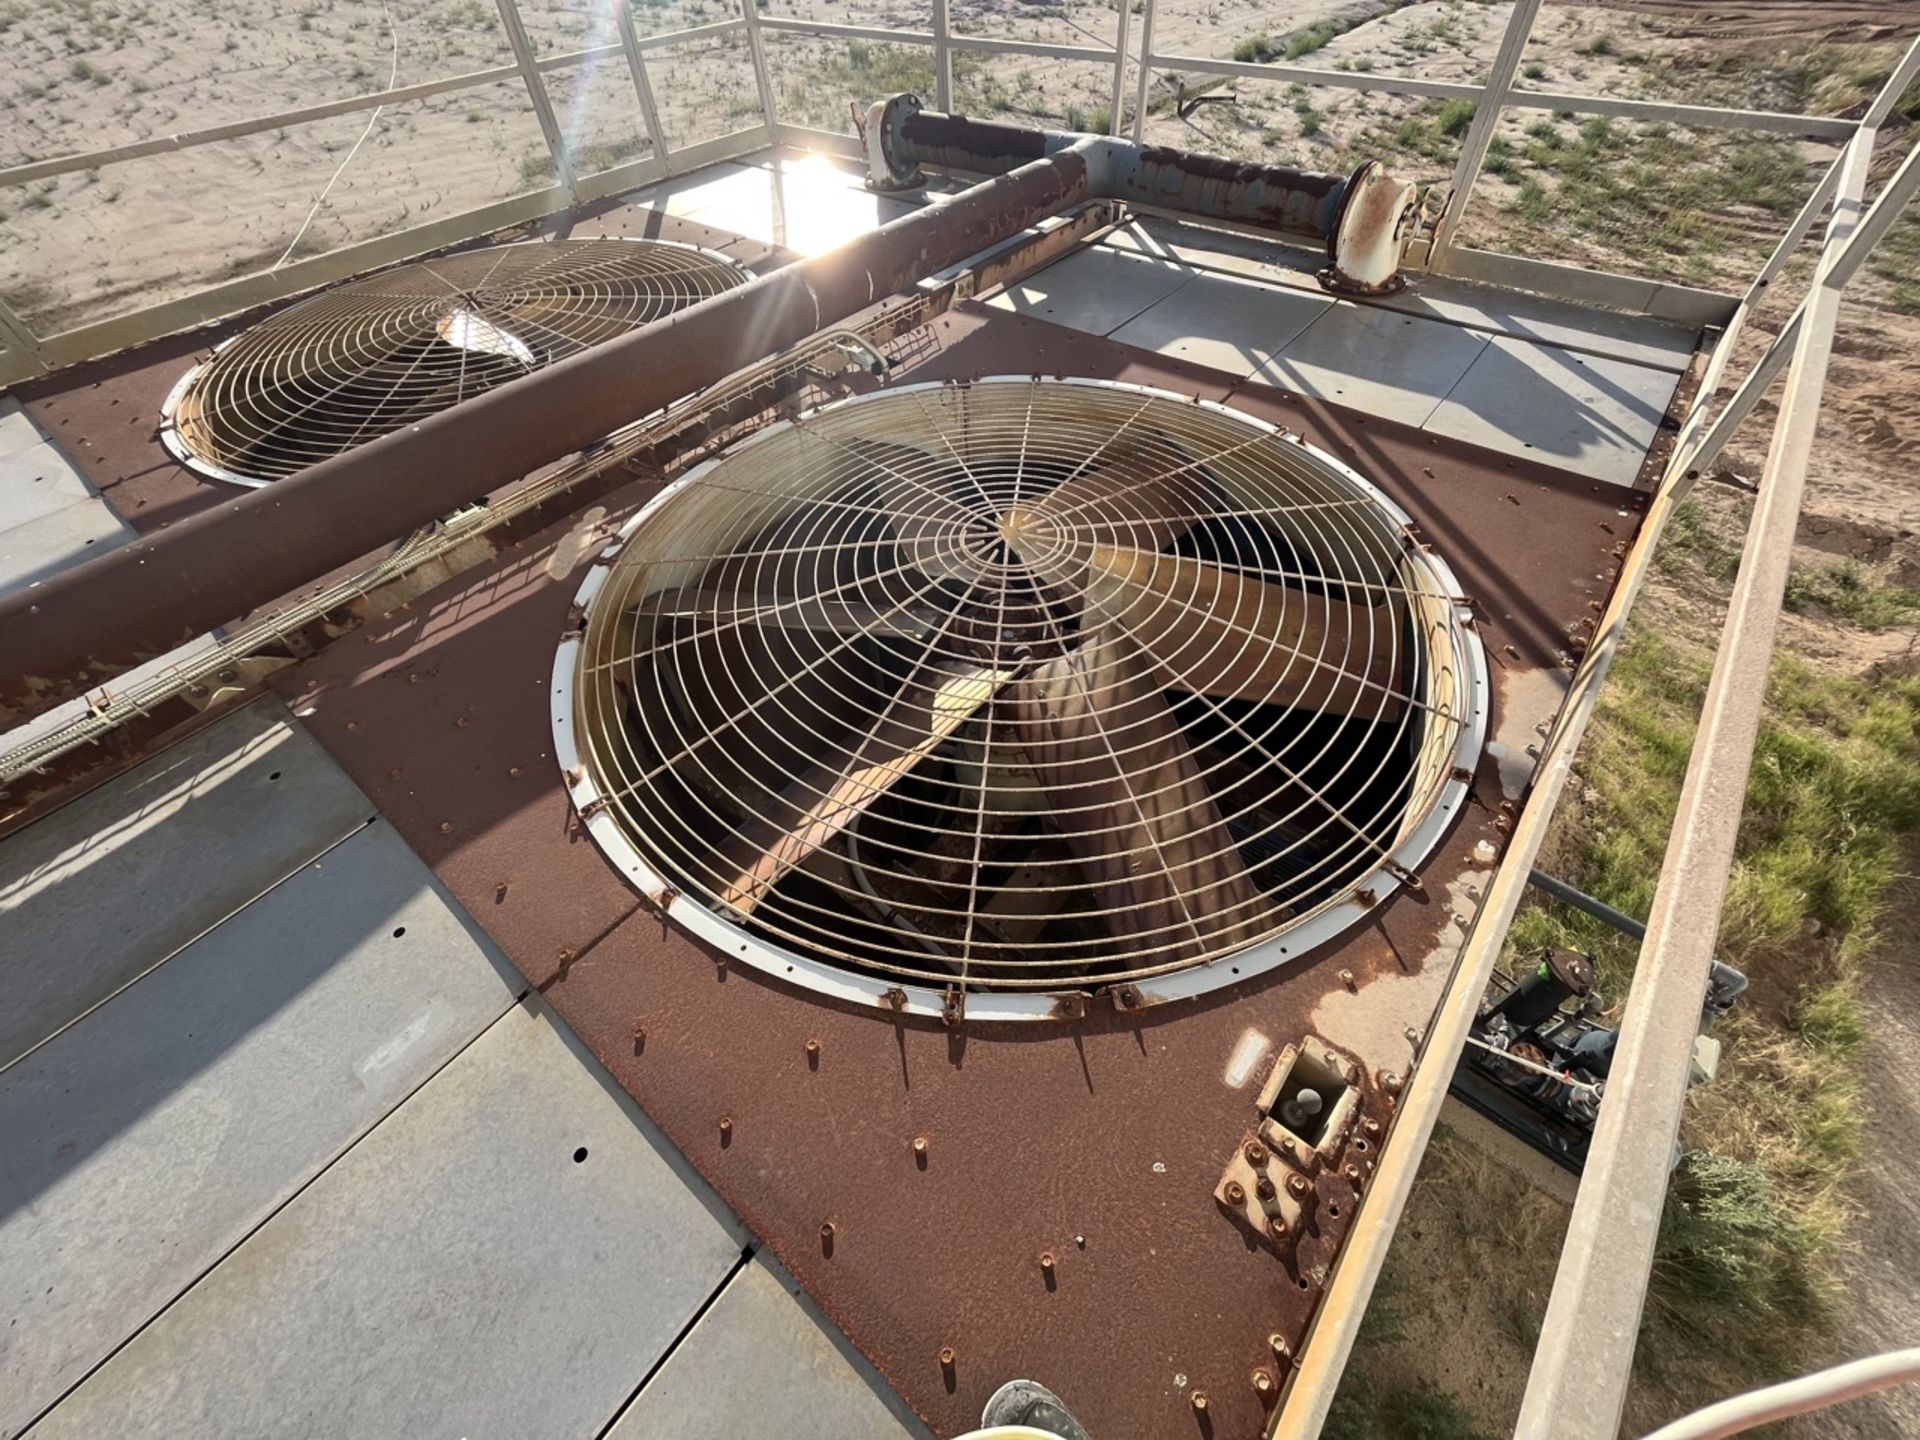 SPX Marley Cooling Tower, Model NC8403TAN2BGF, Series 10090866-A2-NC8403BG-14, Year 2009; 1 cell 25 - Image 12 of 23